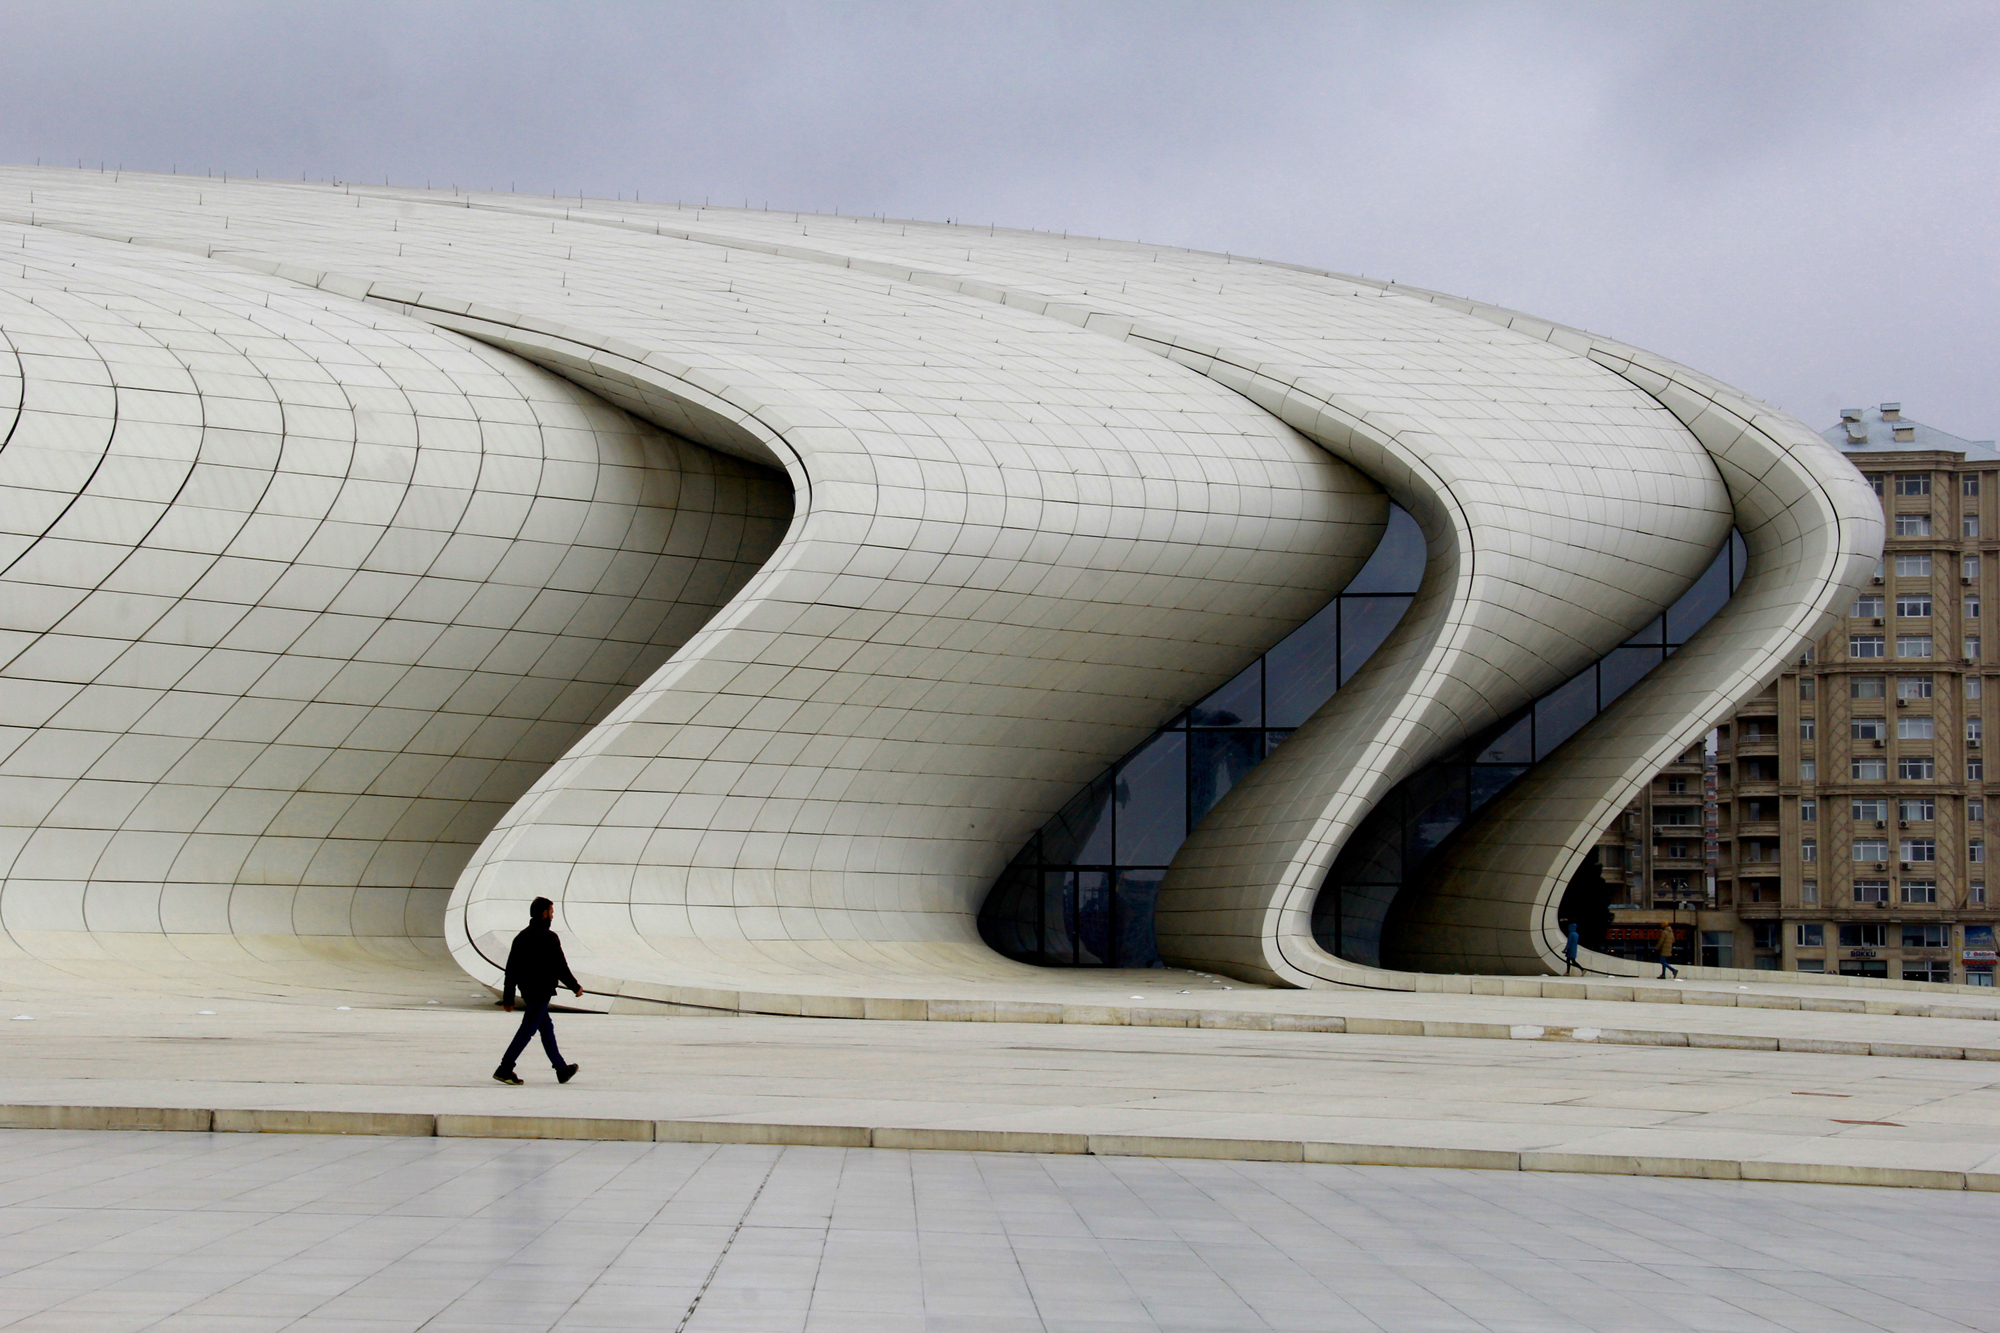 one of the most popular buildings of Baku, modern art museum design by world-famous architect Zaha Hadid, great example of modern architecture to the world